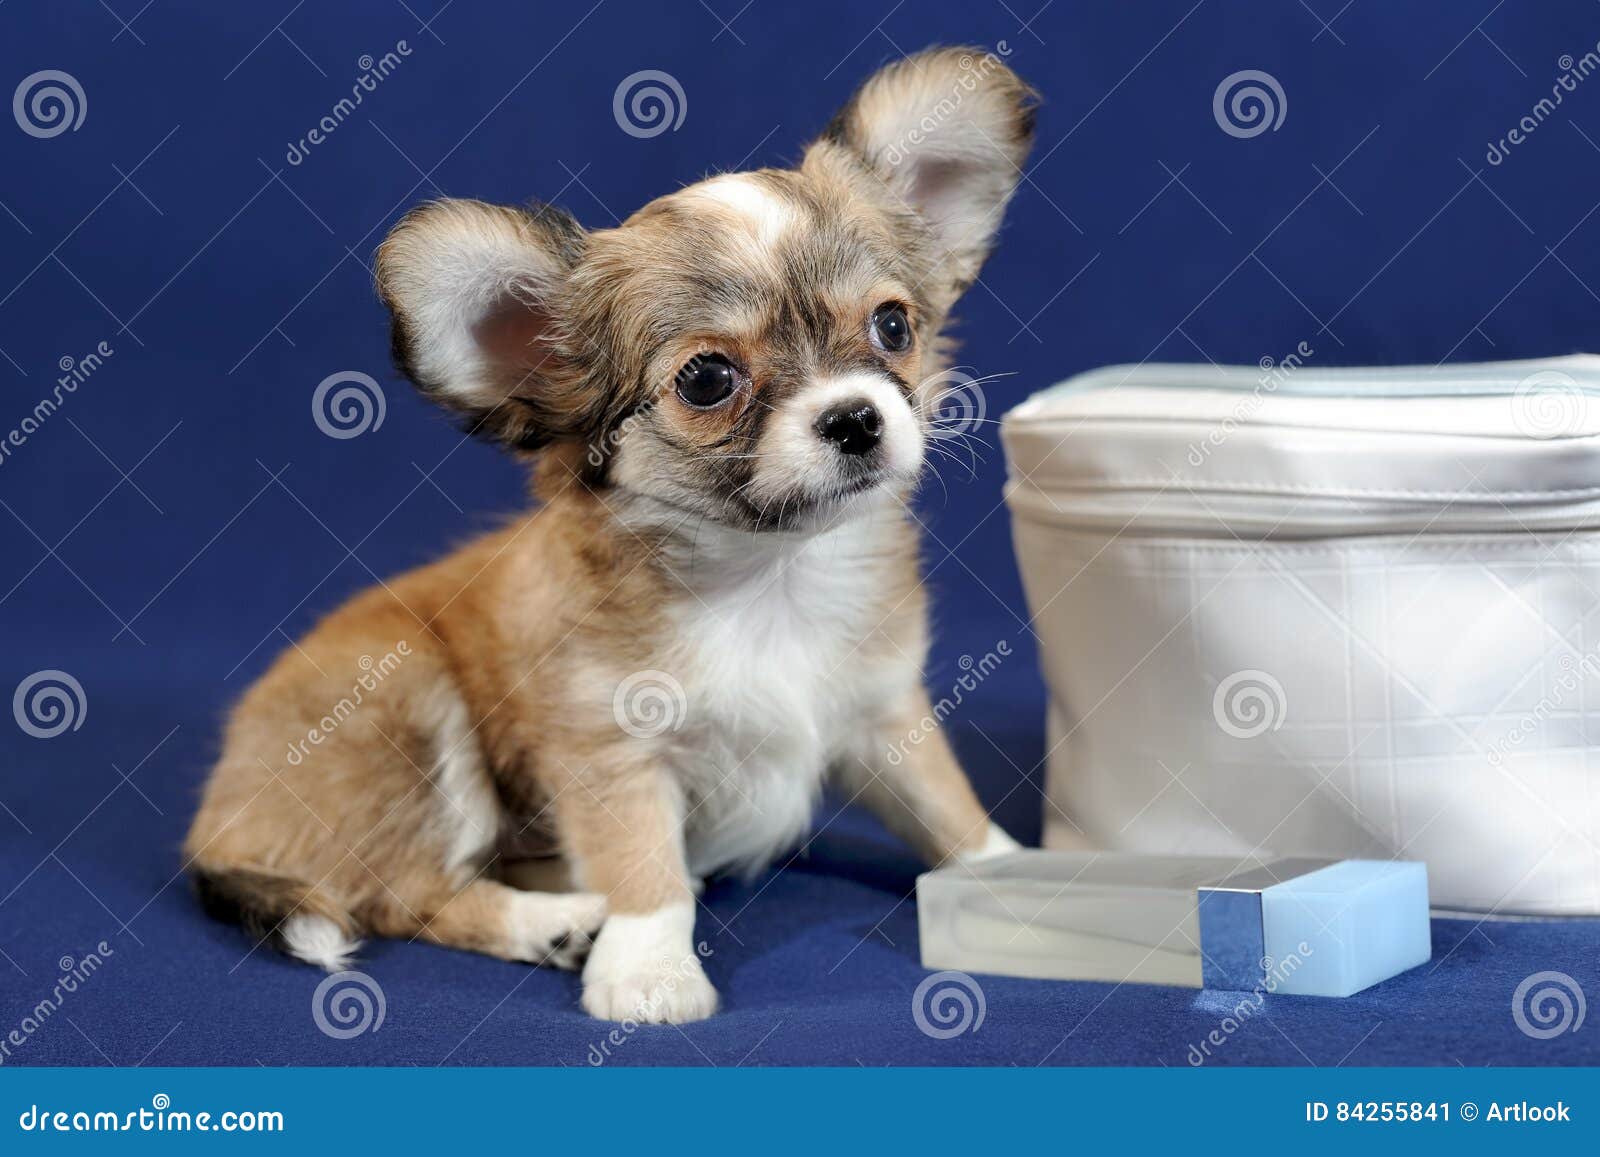 Chihuahua Puppy With Cosmetic Bag Stock Image Image Of Tainy Doggy 84255841